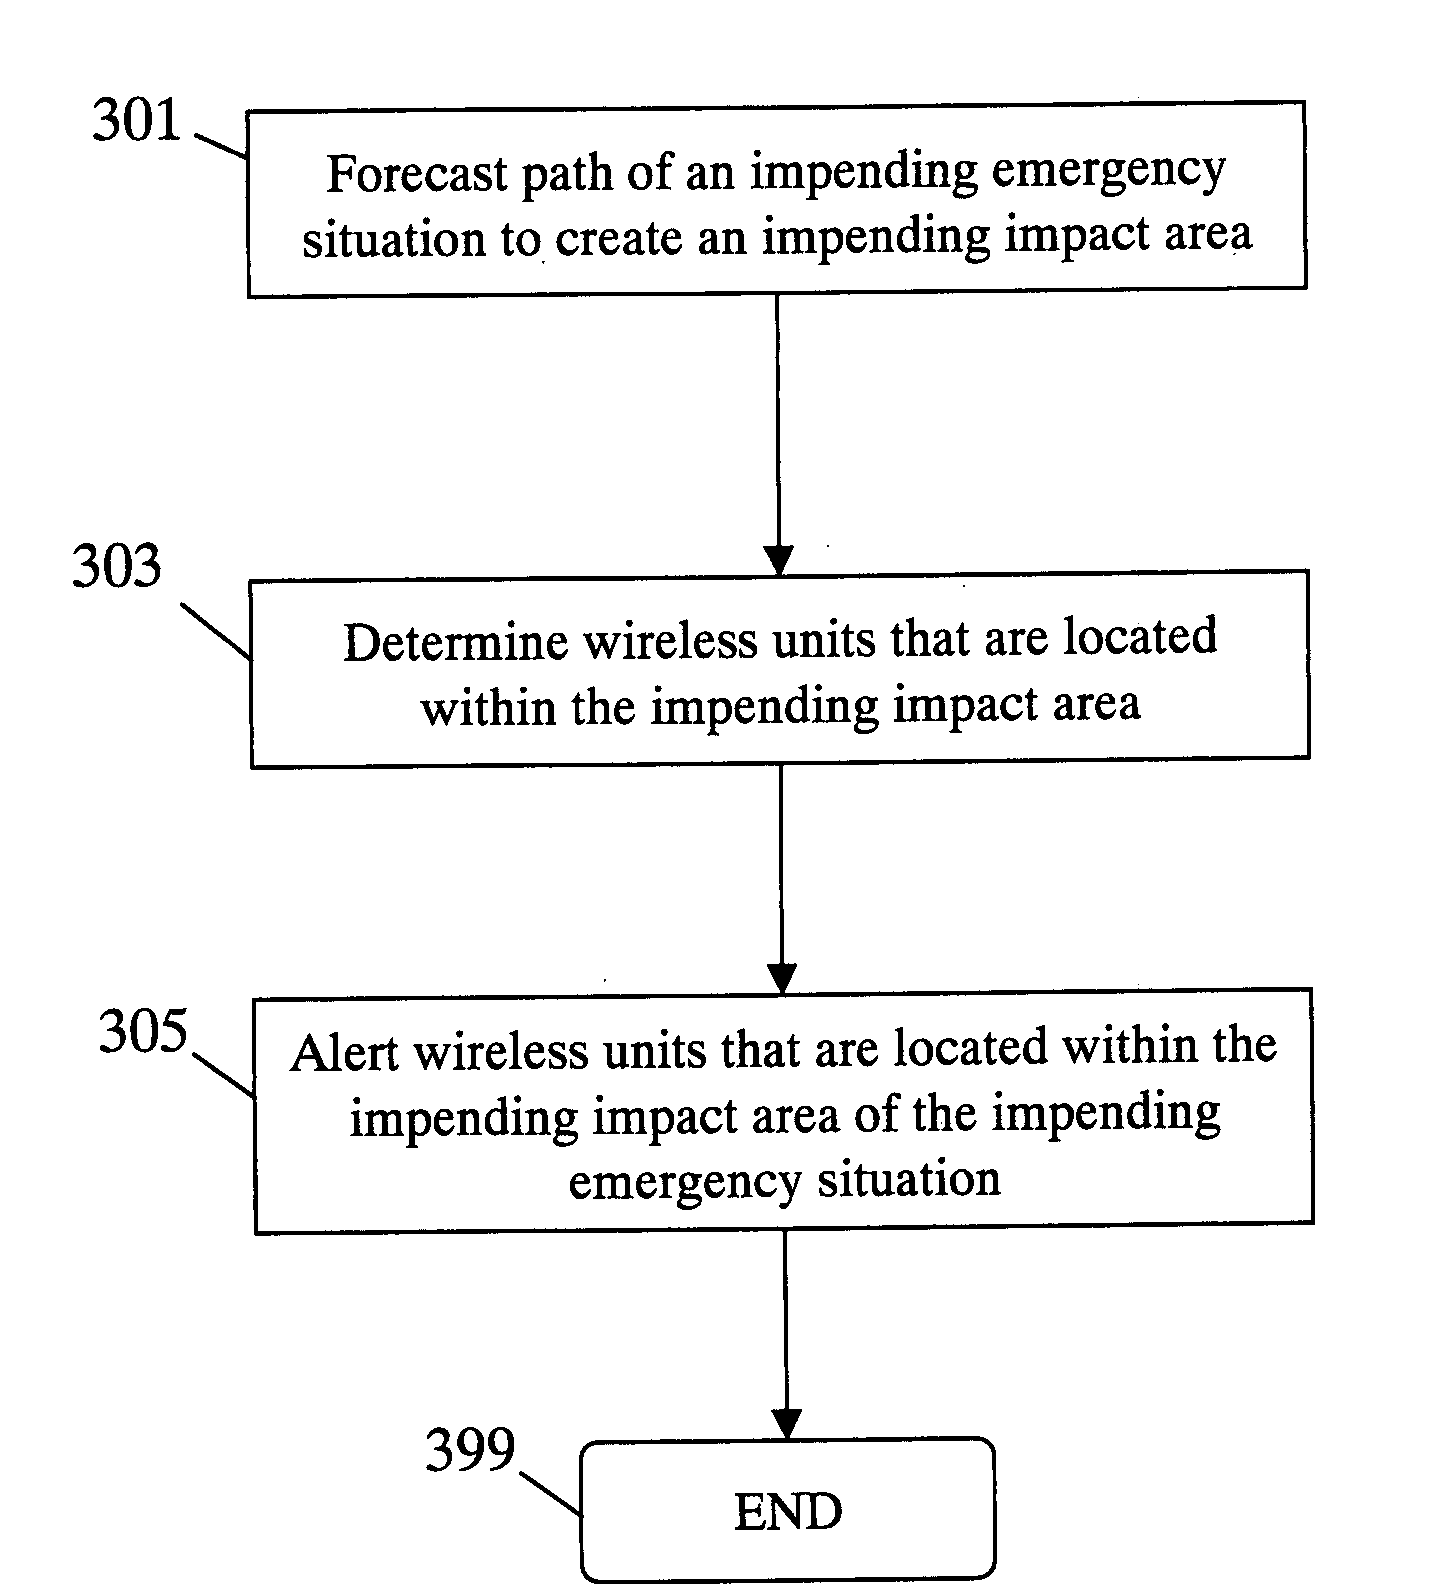 Method for alerting wireless units of an impending emergency situation